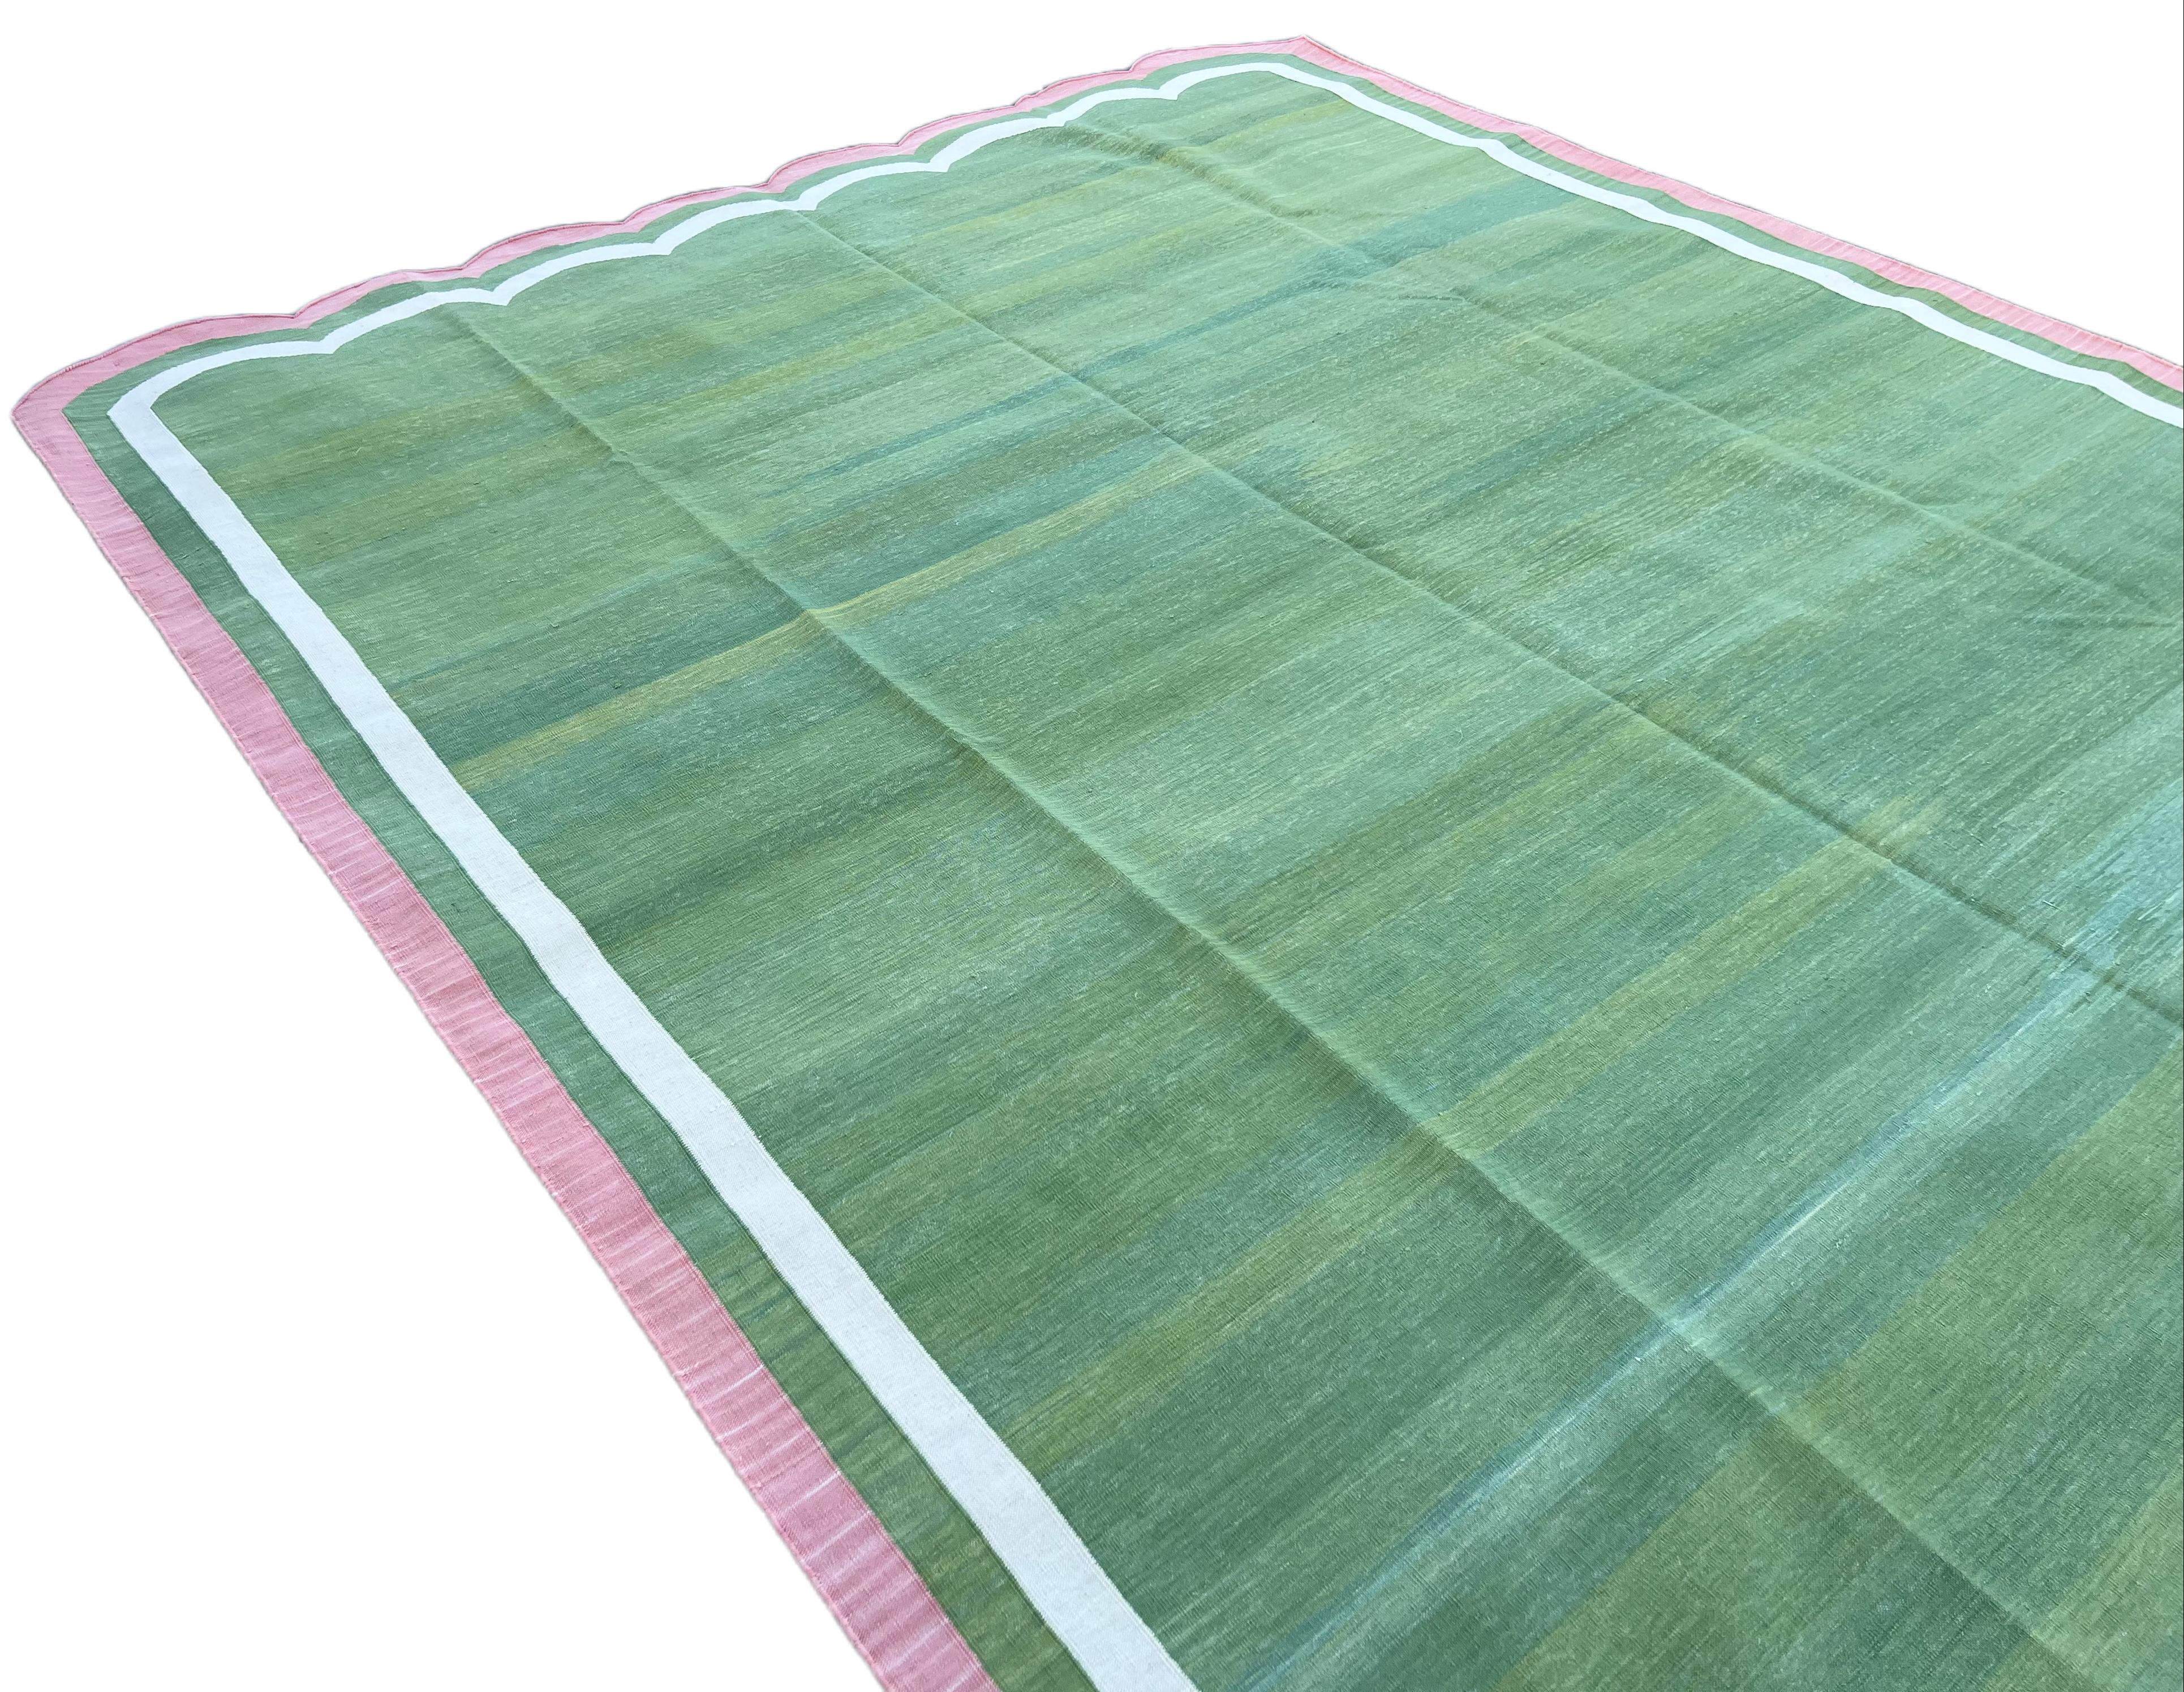 Handmade Cotton Area Flat Weave Rug, 8x10 Green And Pink Scallop Striped Dhurrie In New Condition For Sale In Jaipur, IN